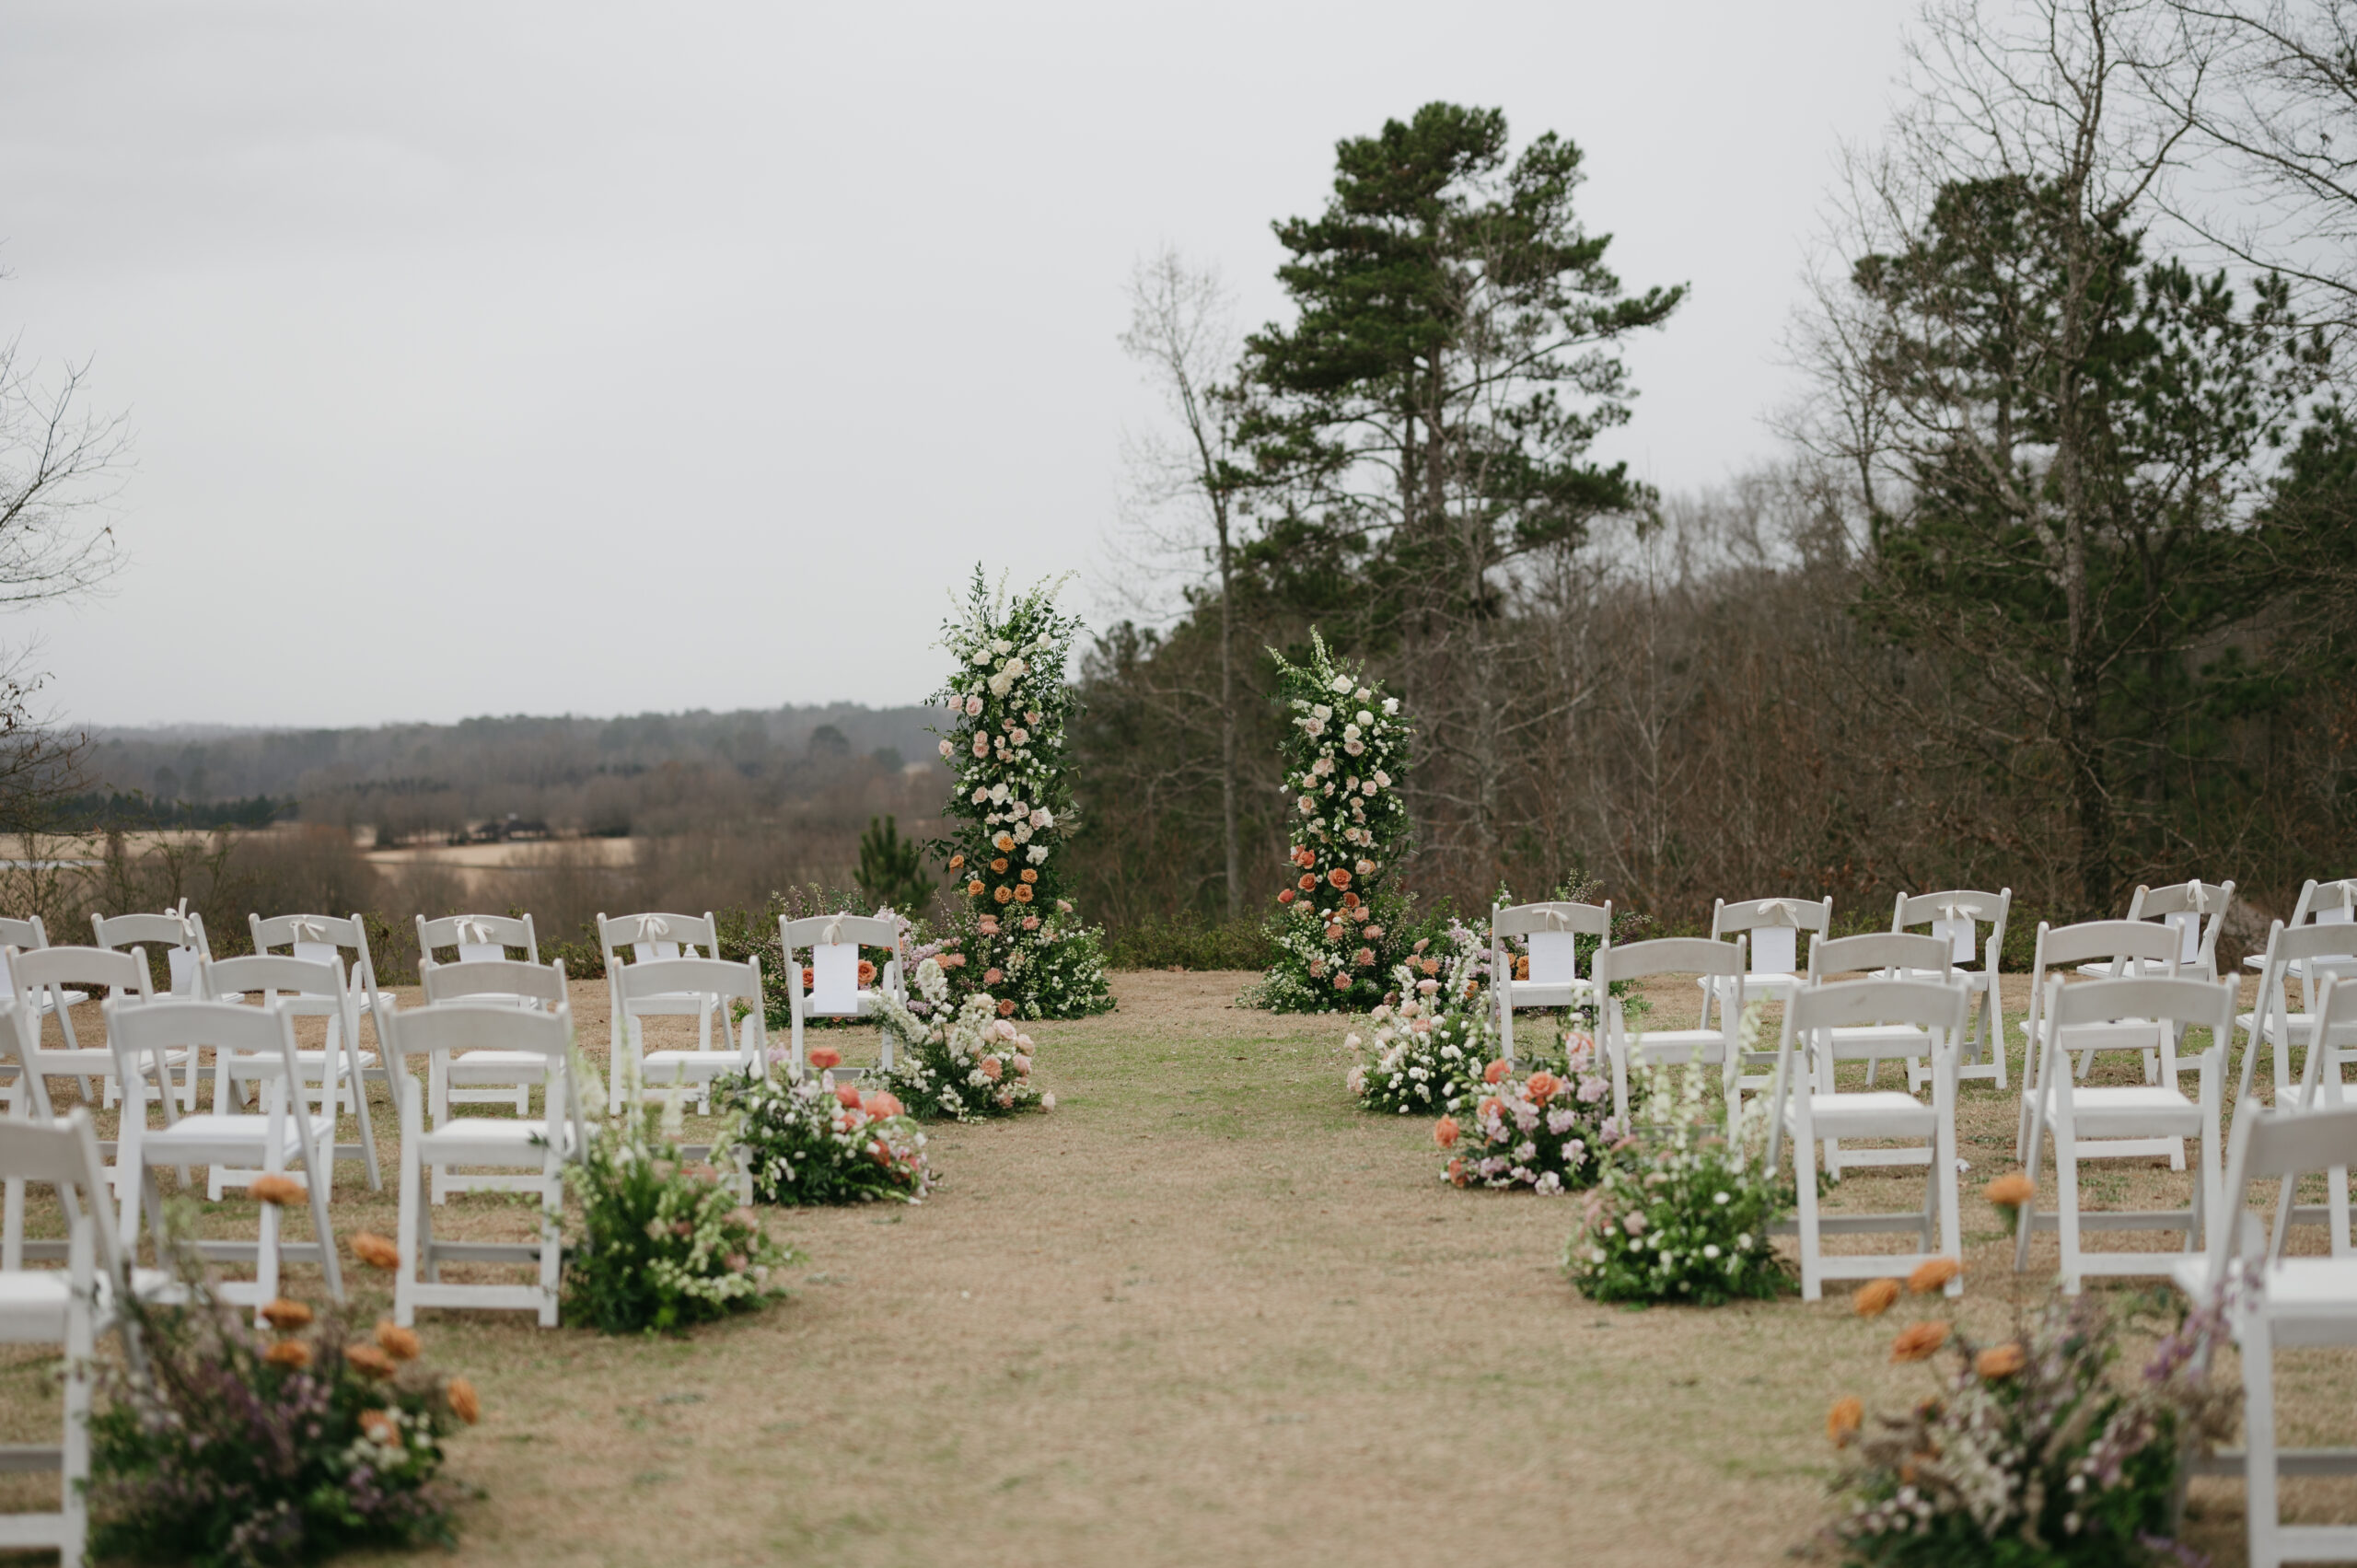 This colorful luxury wedding at Foxhall Resort had a broken floral arch and an aisle full of flowers. | Megan Kuhn Photography